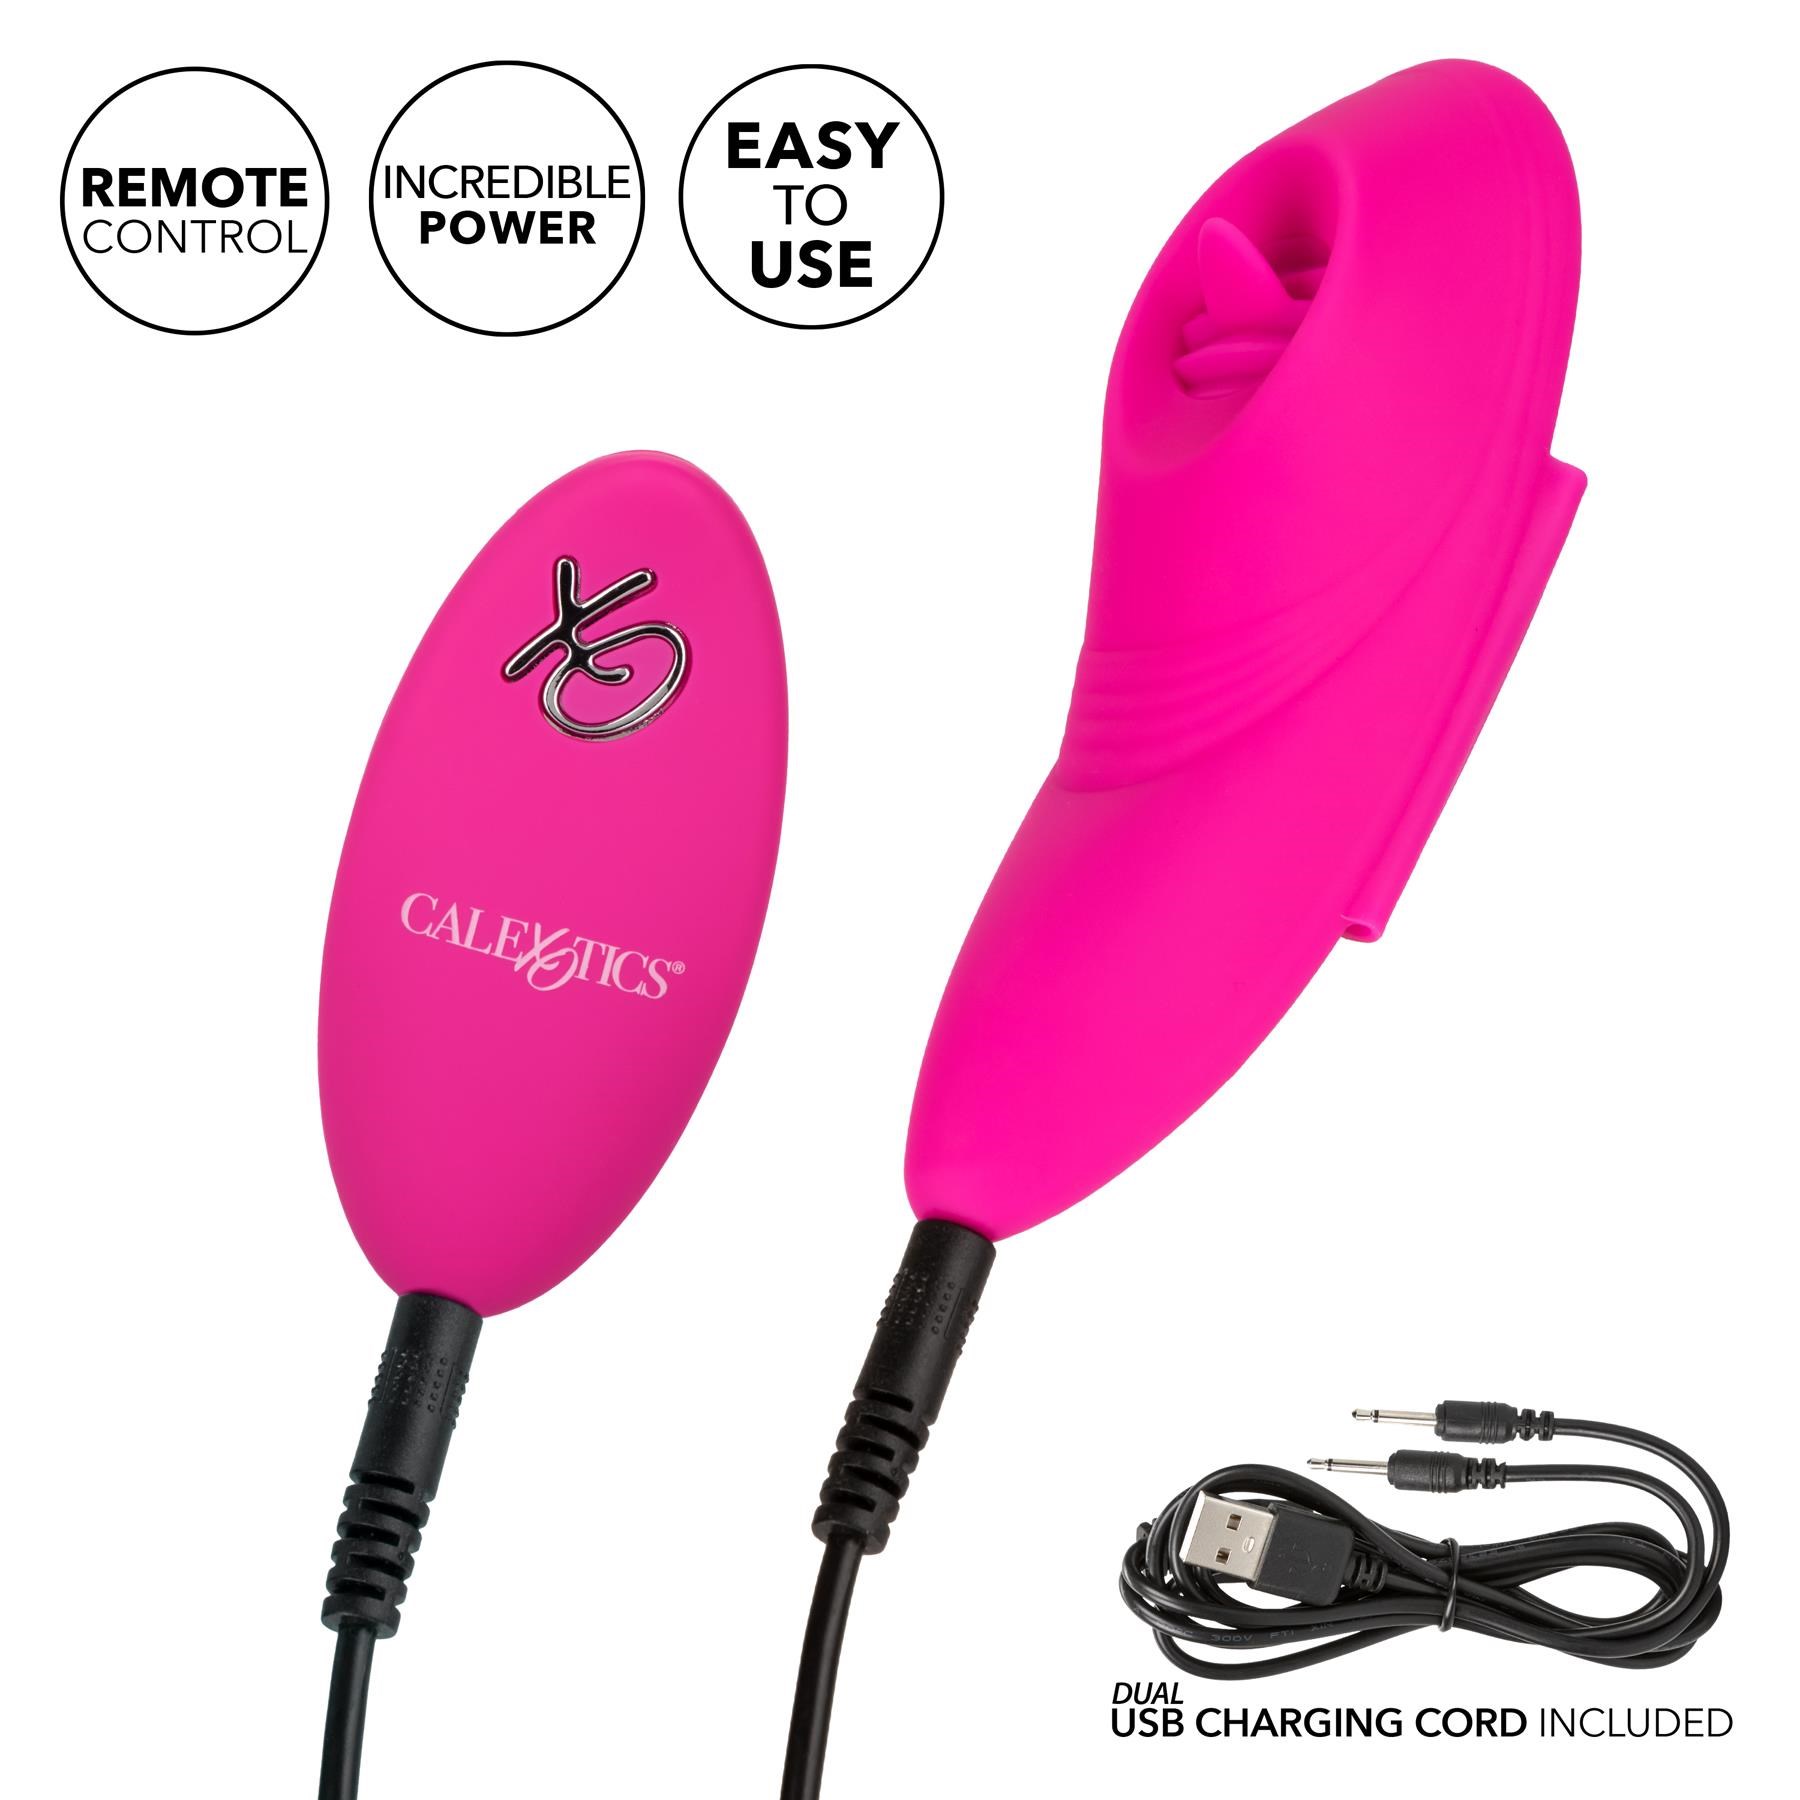 Lock-N-Play Remote Flicker Panty Teaser - Showing Where Charging Cables are Placed